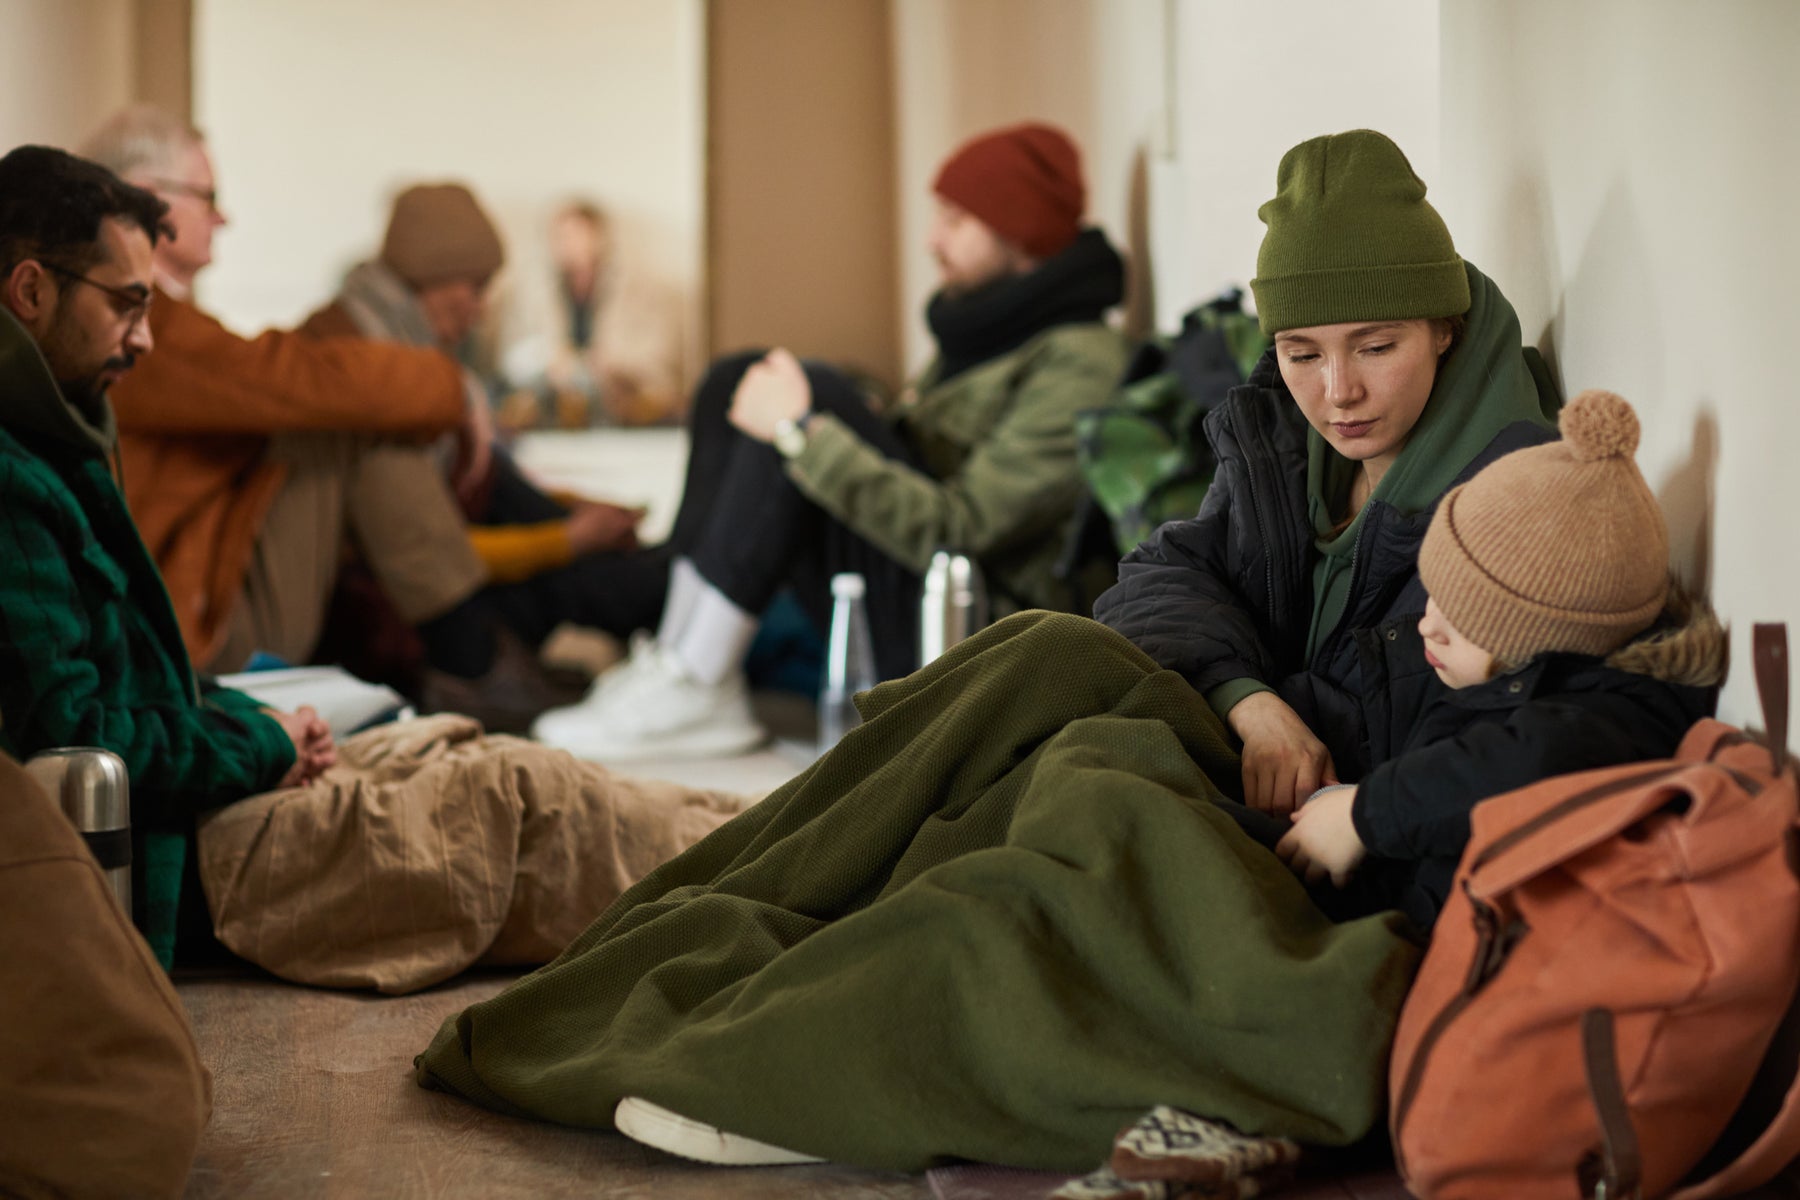 Equipping UK Homeless with Bulk Sleeping Bag Donations